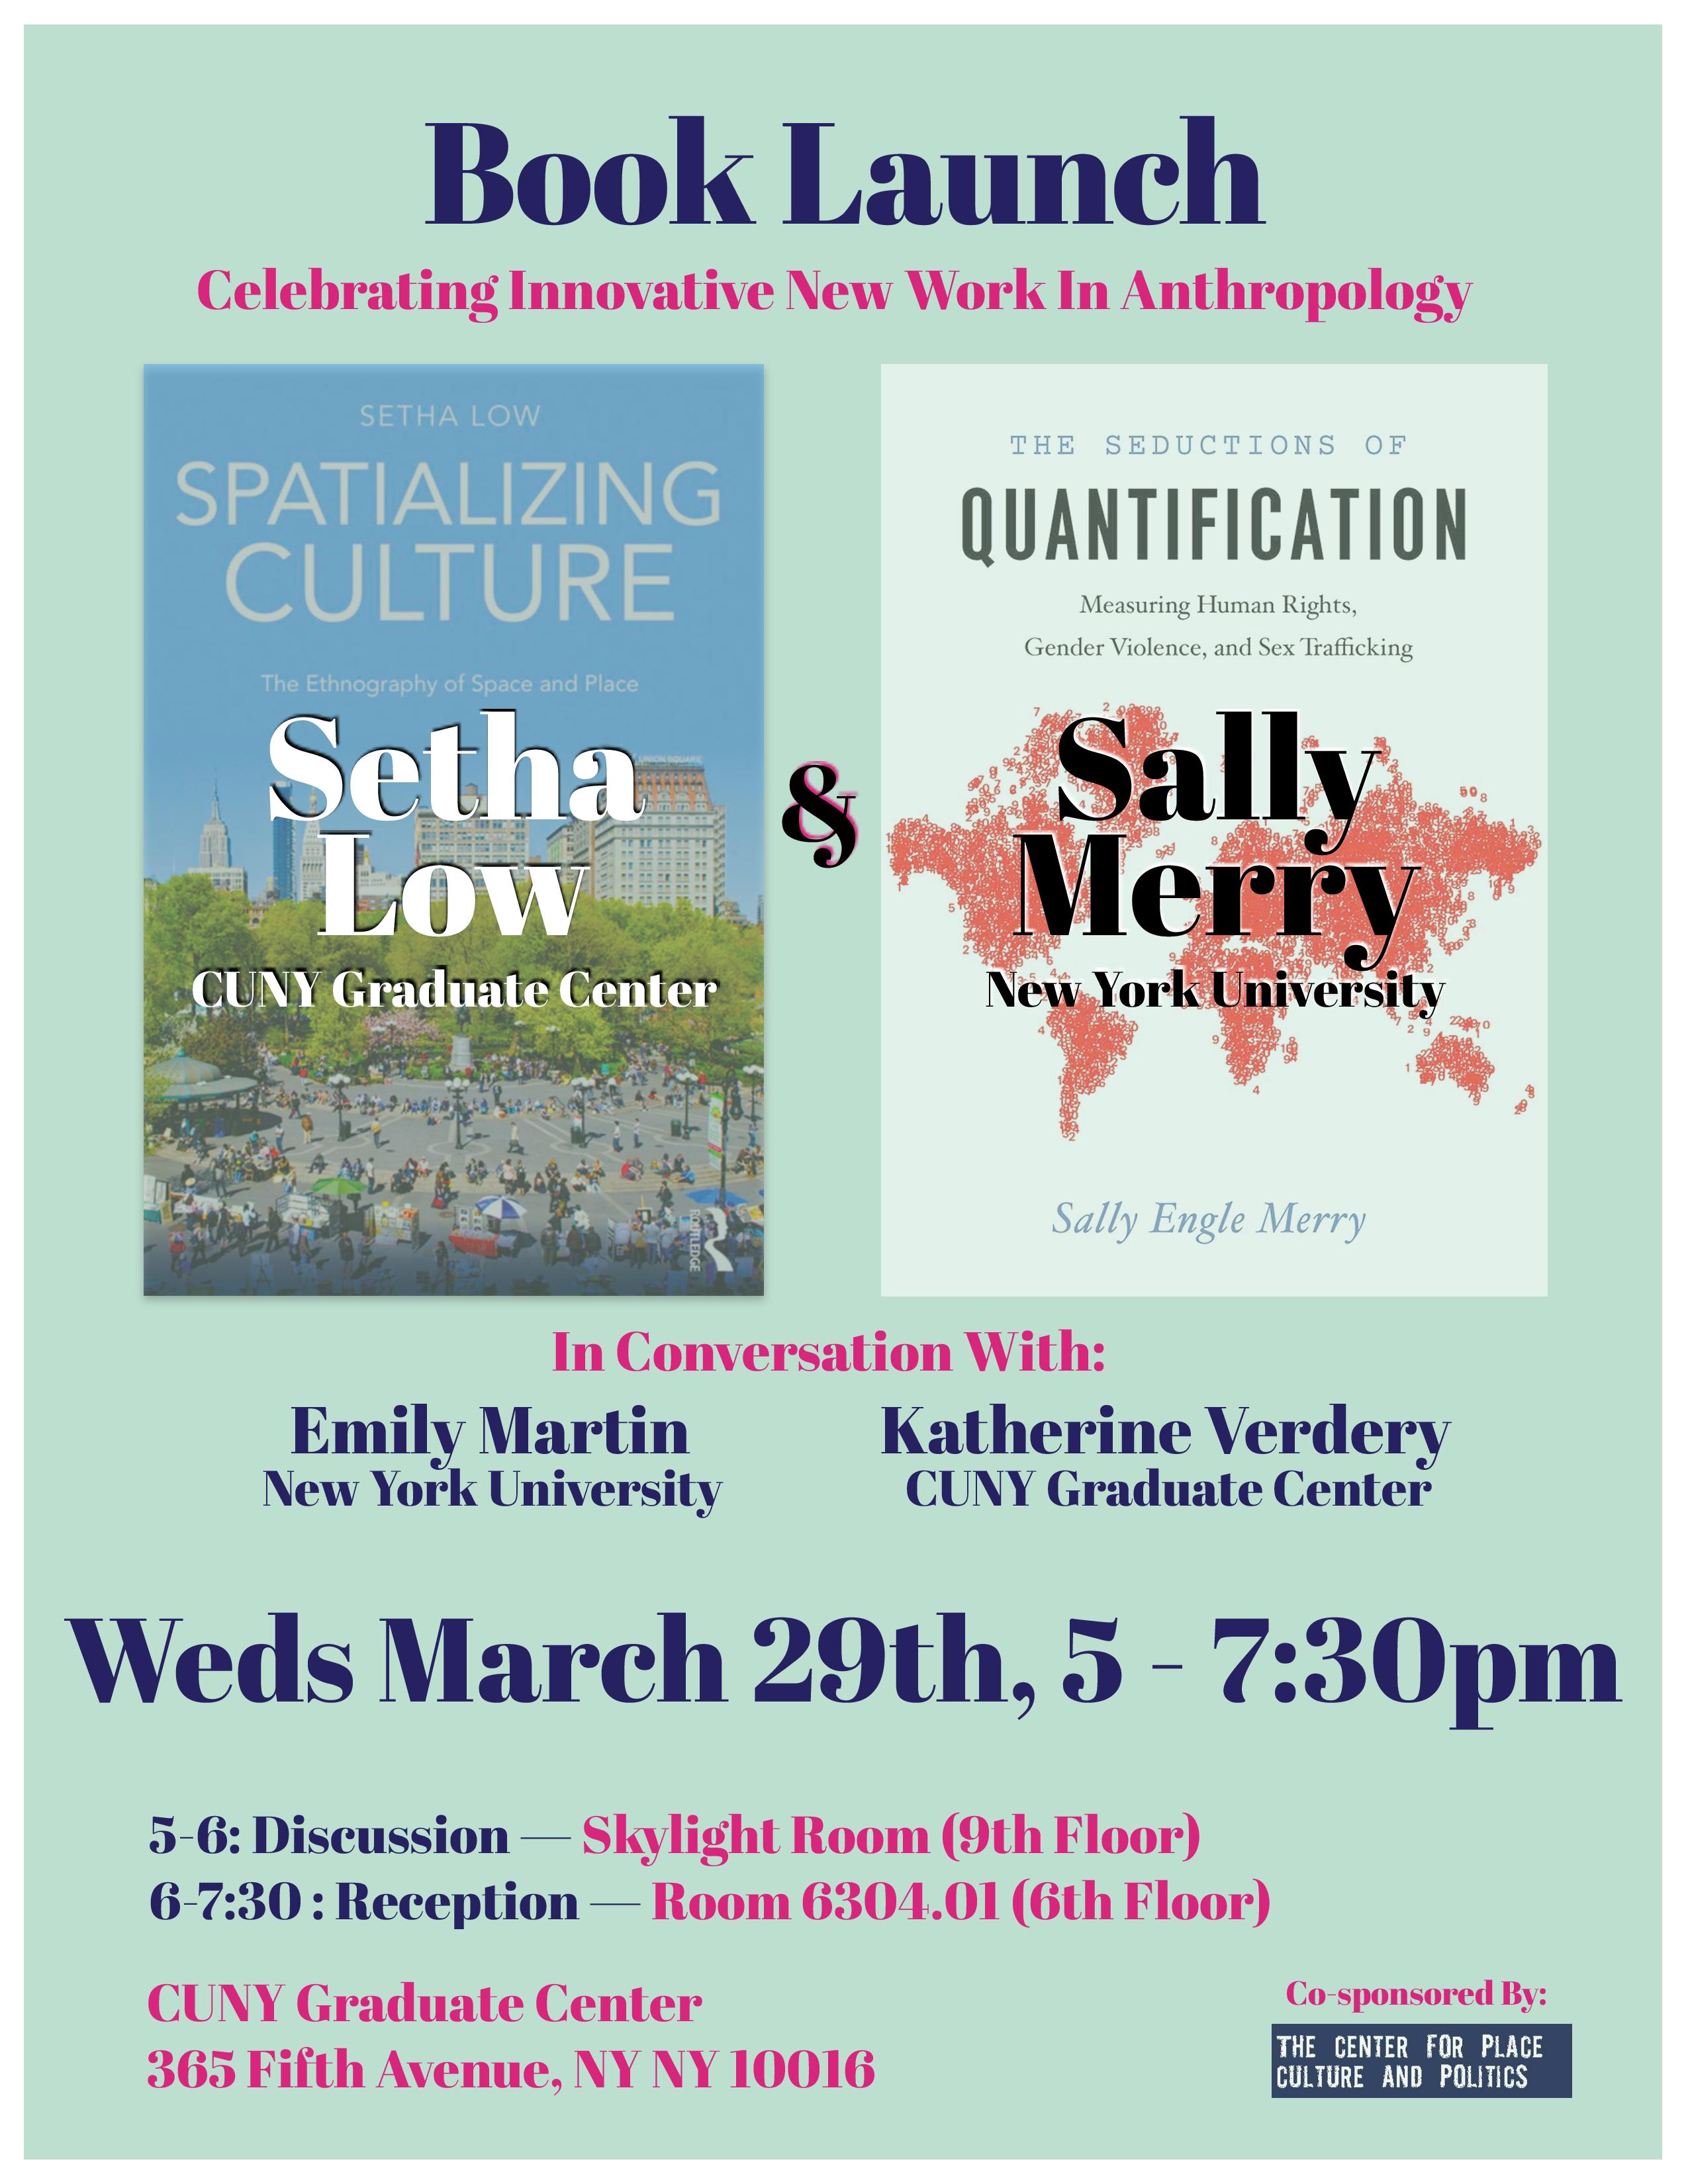 3/29: Book Launch: Celebrating Innovative New Work In Anthropology